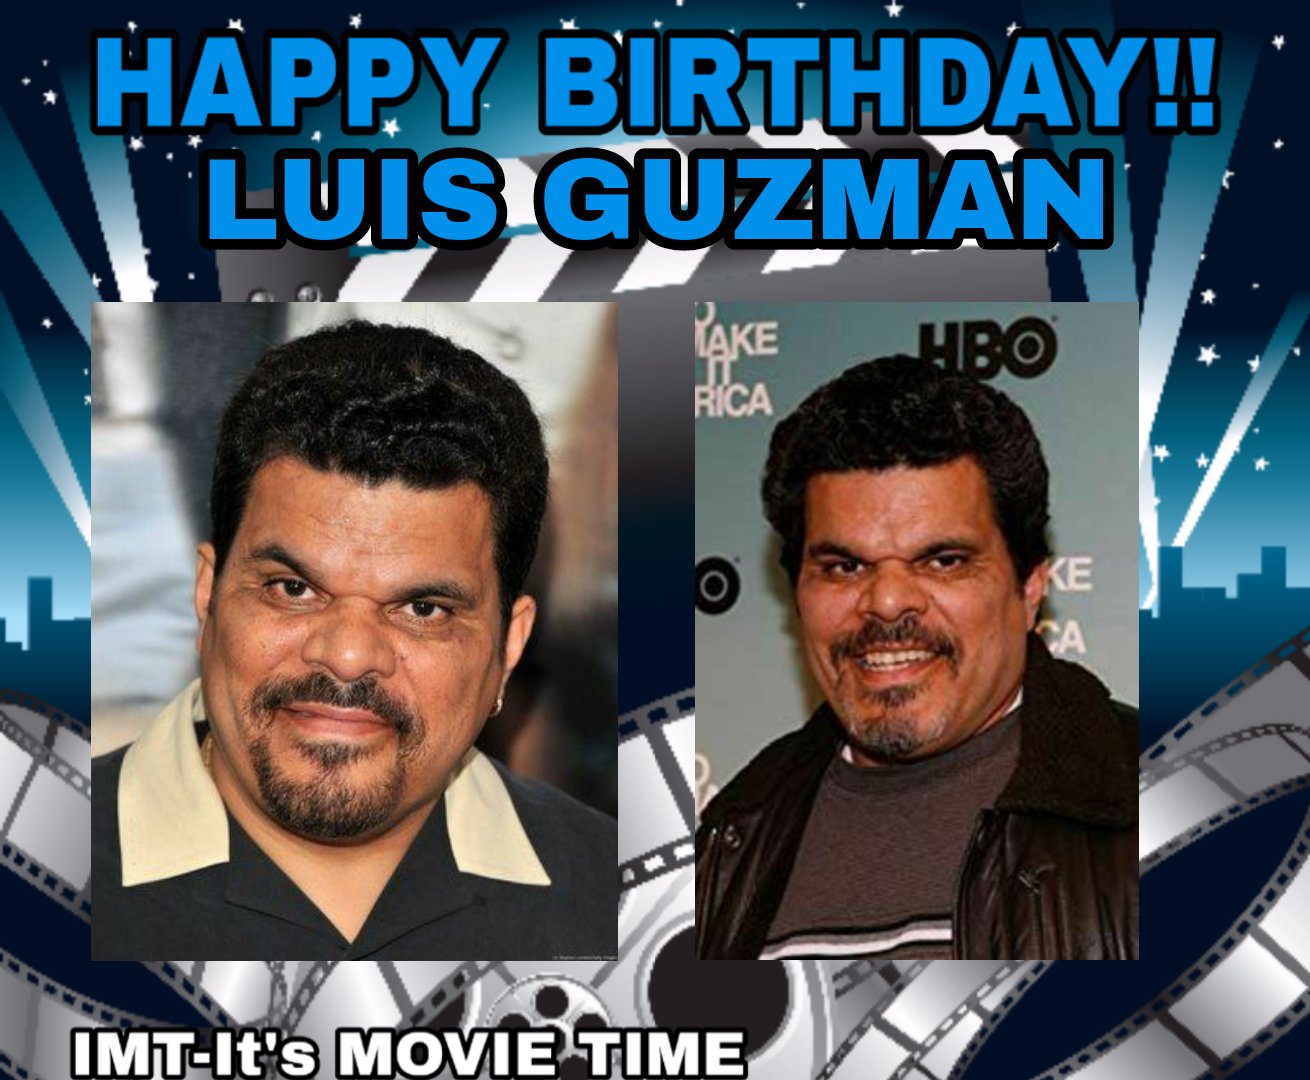 Happy Birthday to Luis Guzmán! The actor is celebrating 64 years. 